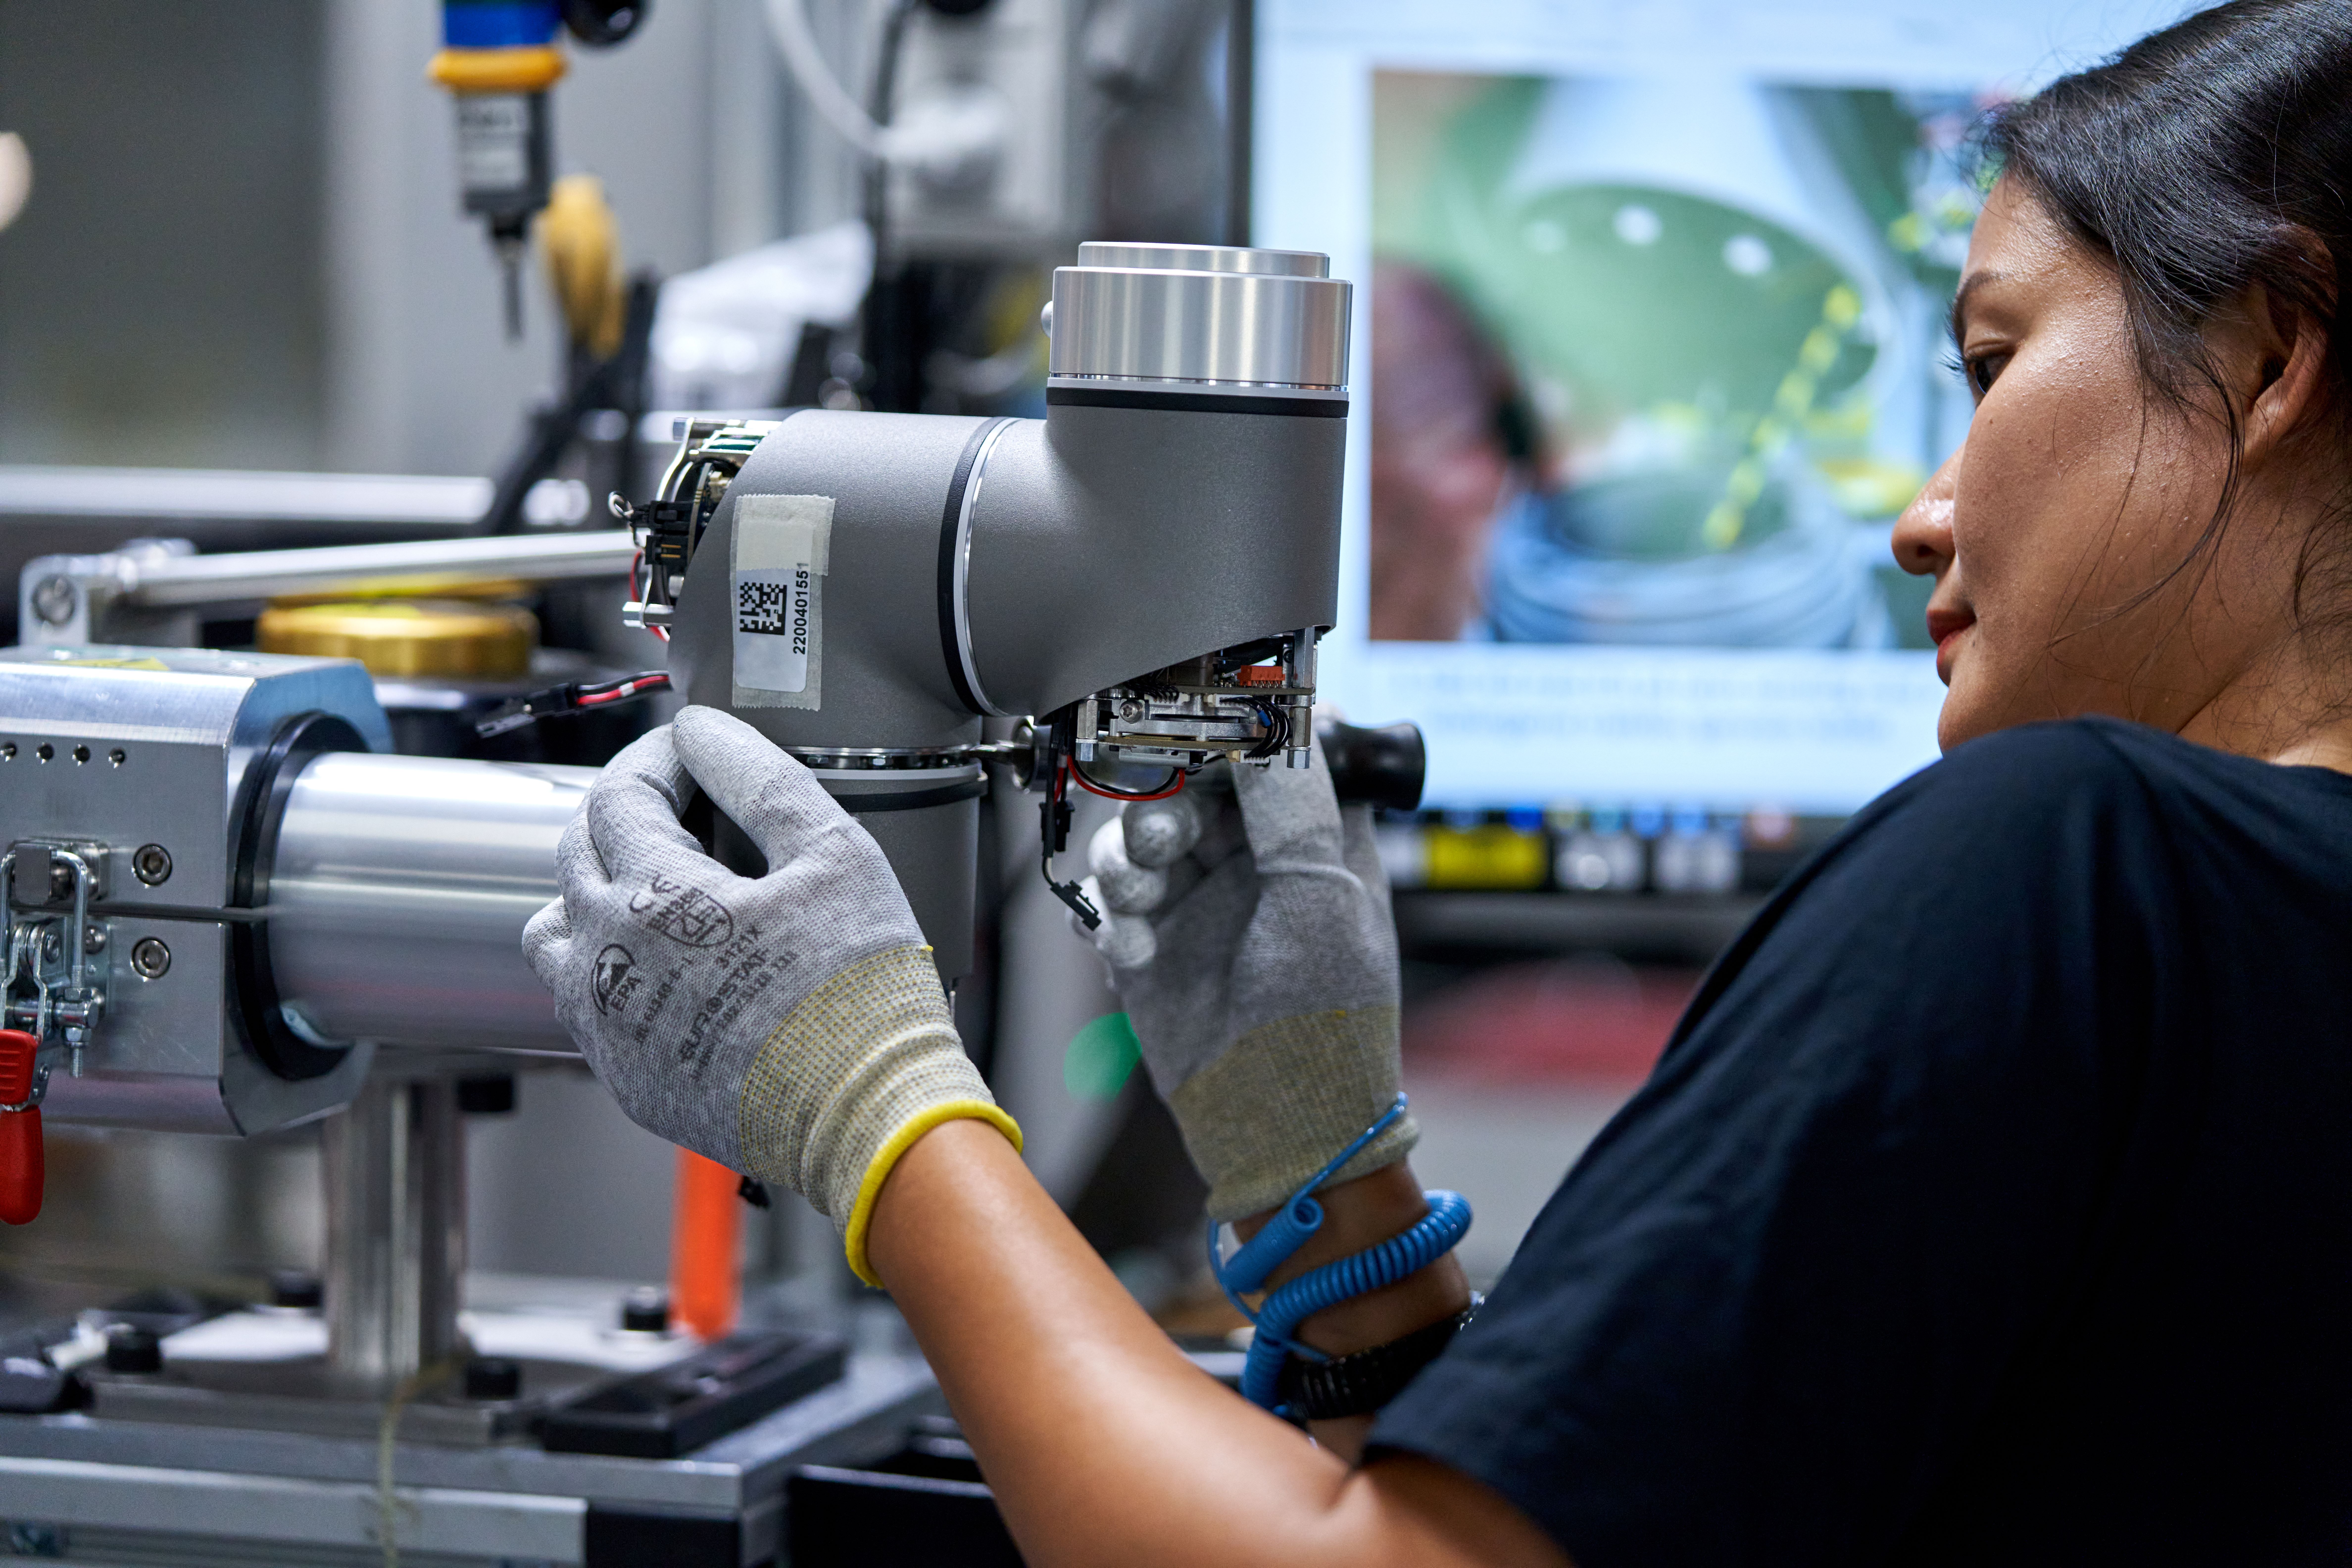 Universal Robots Reports Record Annual Revenue of over $300M - Industry